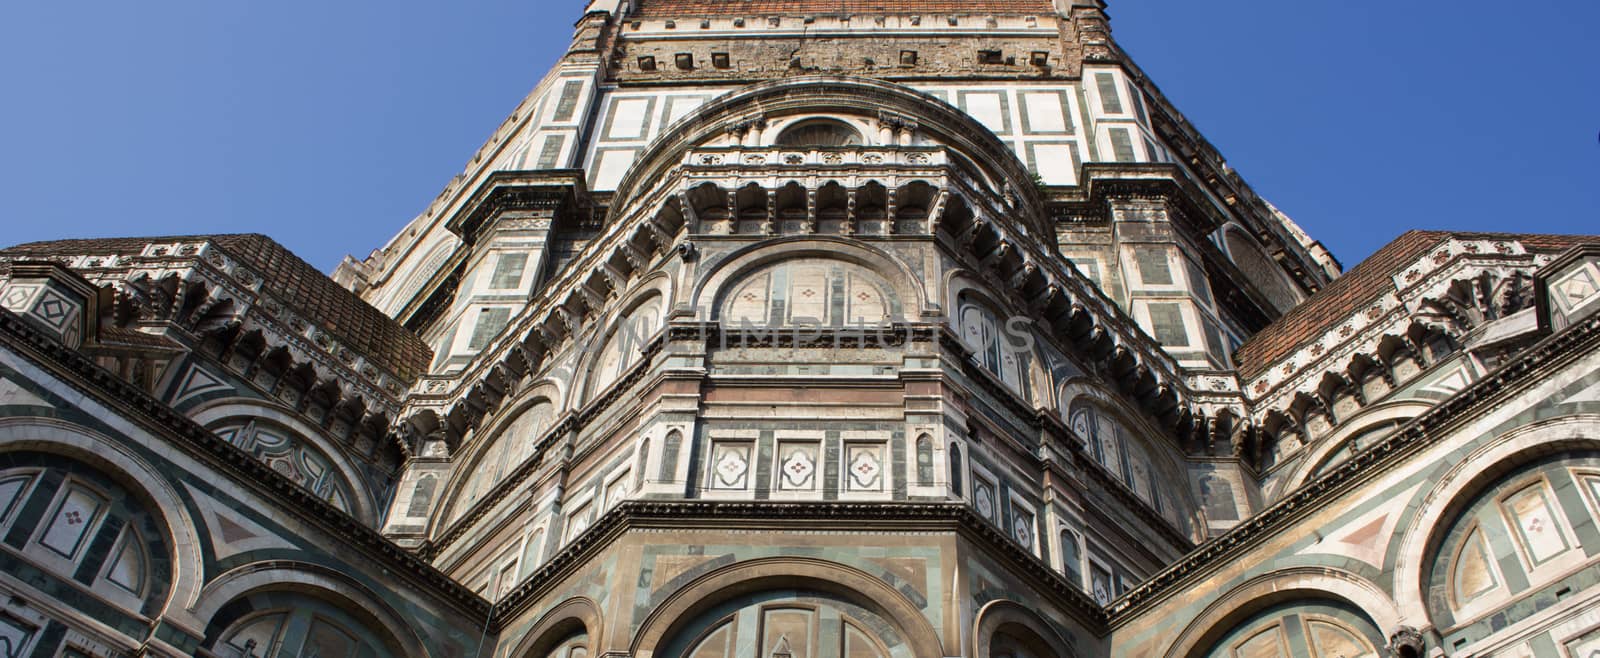 Florence, Santa Maria del Fiore by goghy73